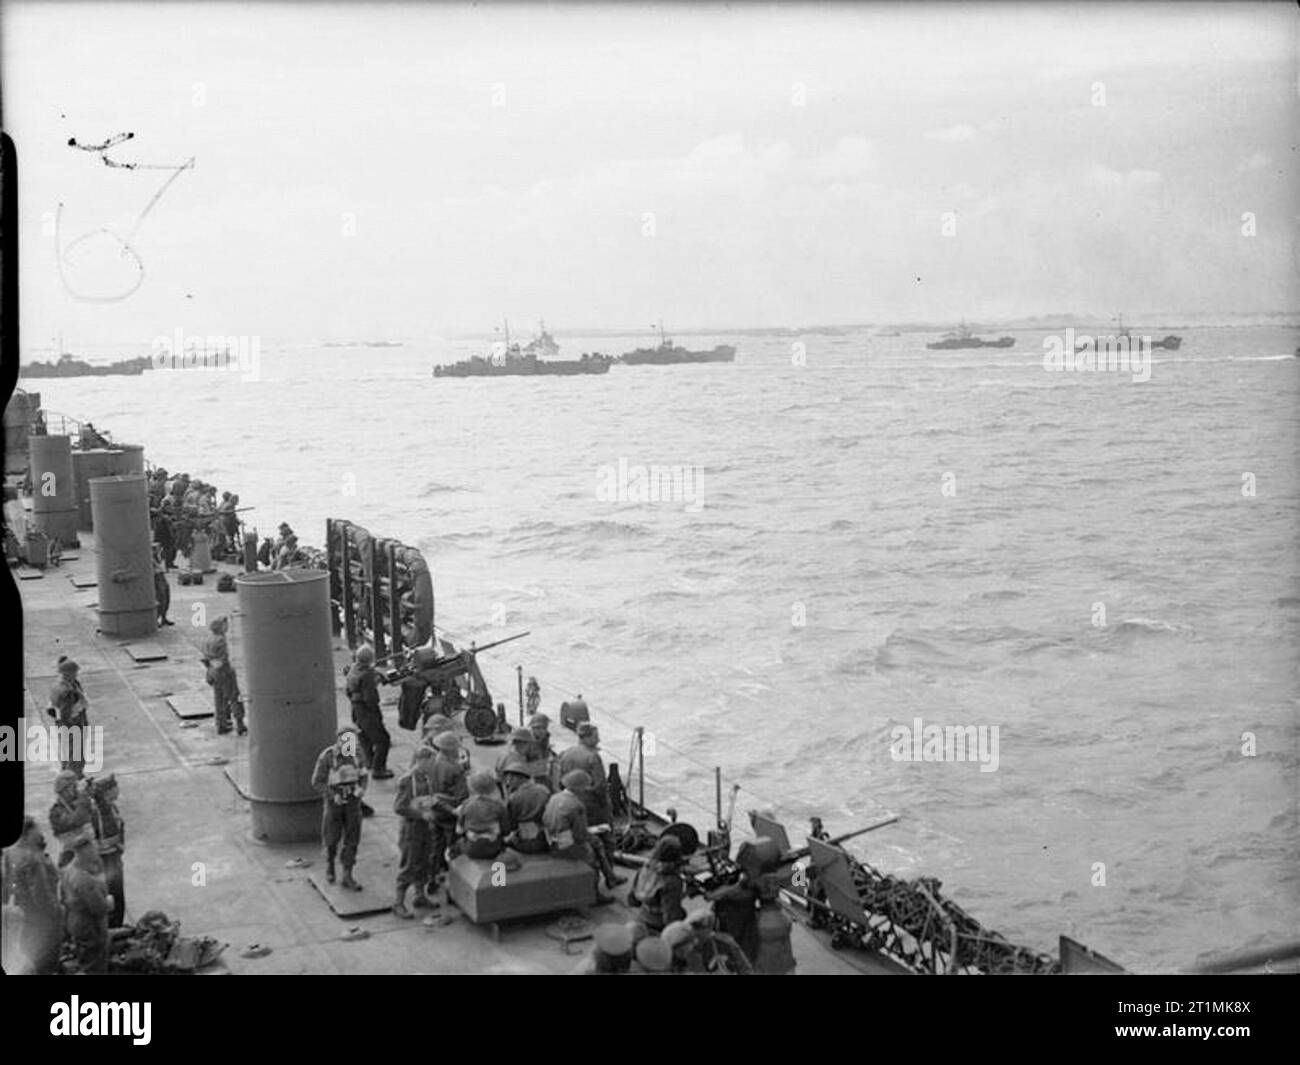 D-day - Allied Forces during the Invasion of Normandy 6 June 1944 British troops and US sailors manning 20mm gun positions on board USS LST-25 watch LCI(L) landing craft head towards the beaches of Gold assault area, 6 June 1944. Stock Photo